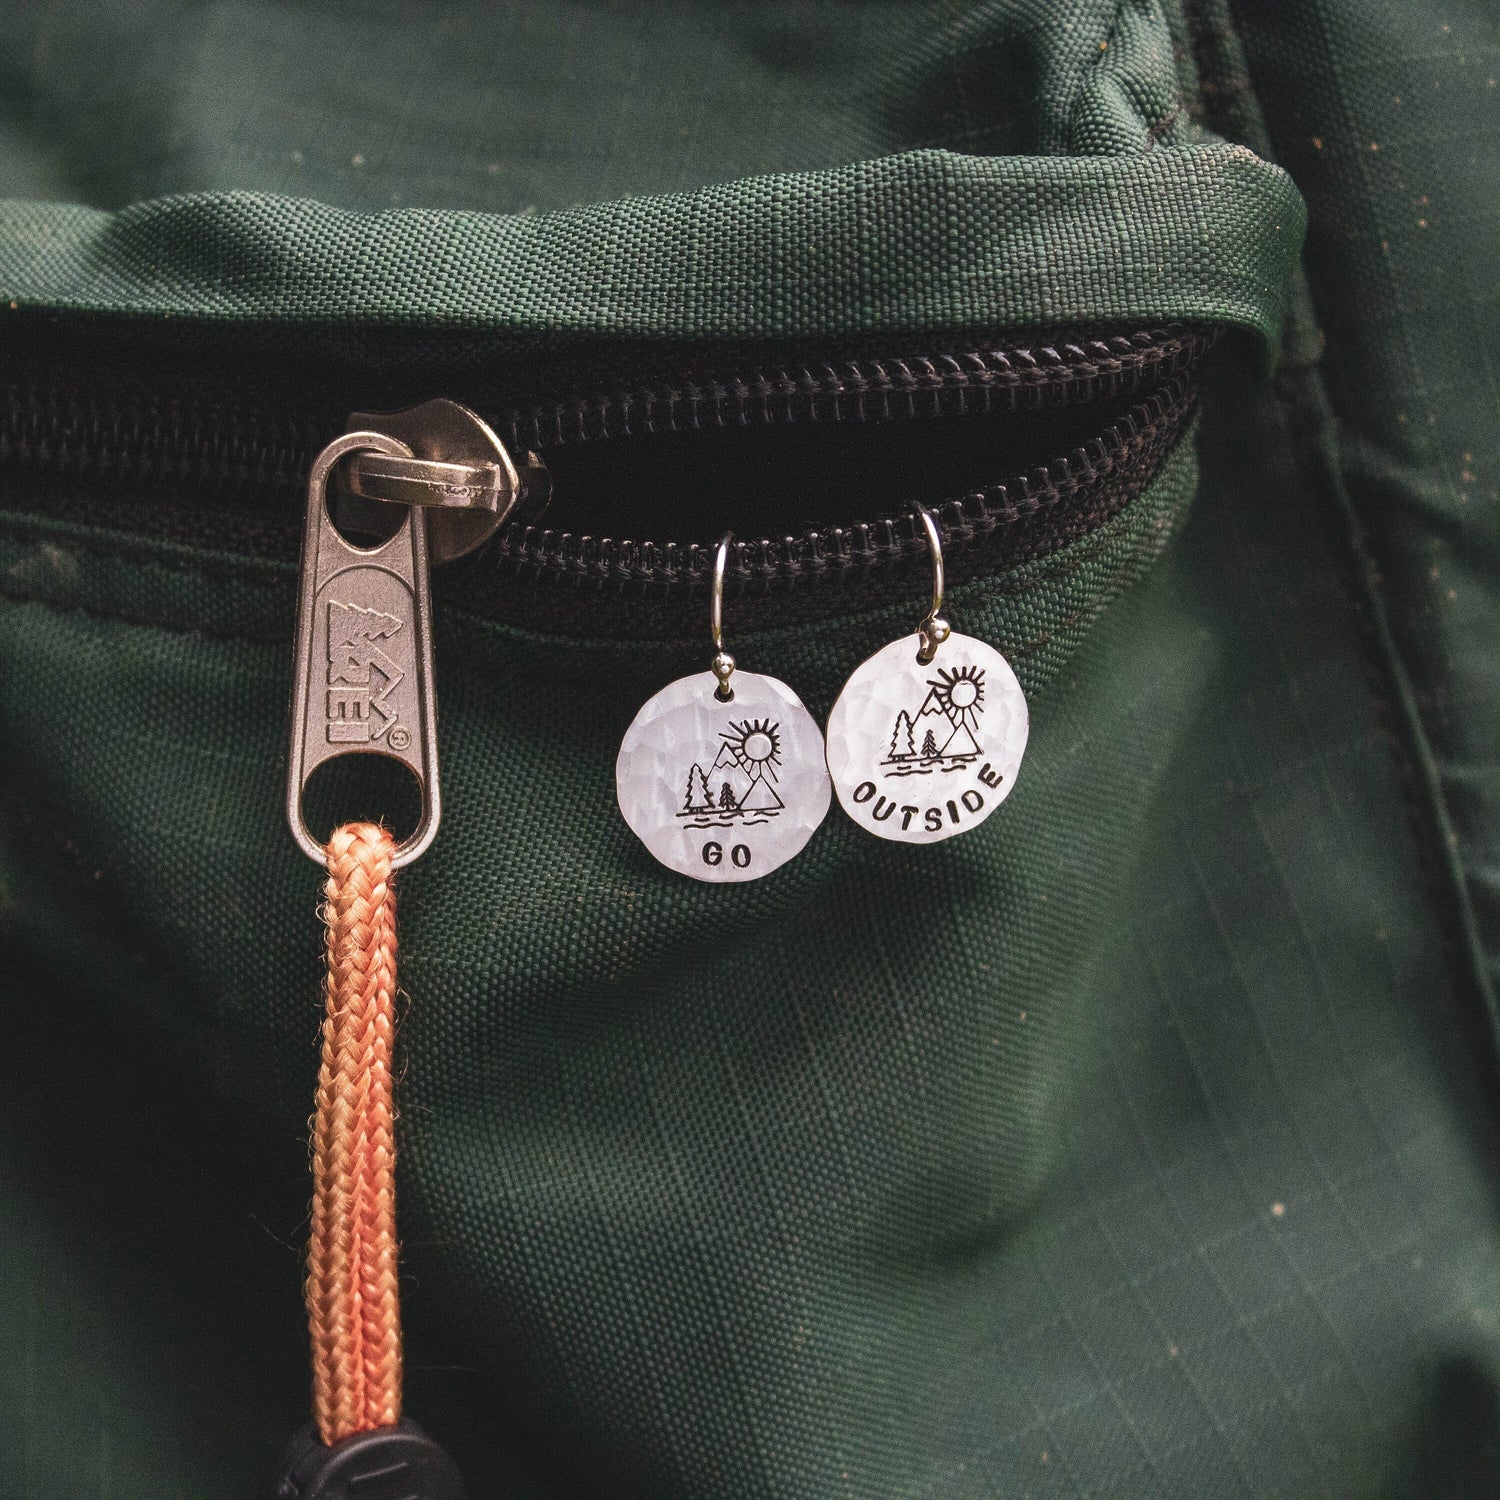 GO OUTSIDE Sterling Silver Earrings, Mountain Hiker Jewelry, Hand Stamped Personalized Earrings, Happy Camper Jewelry Camping Gift for Her